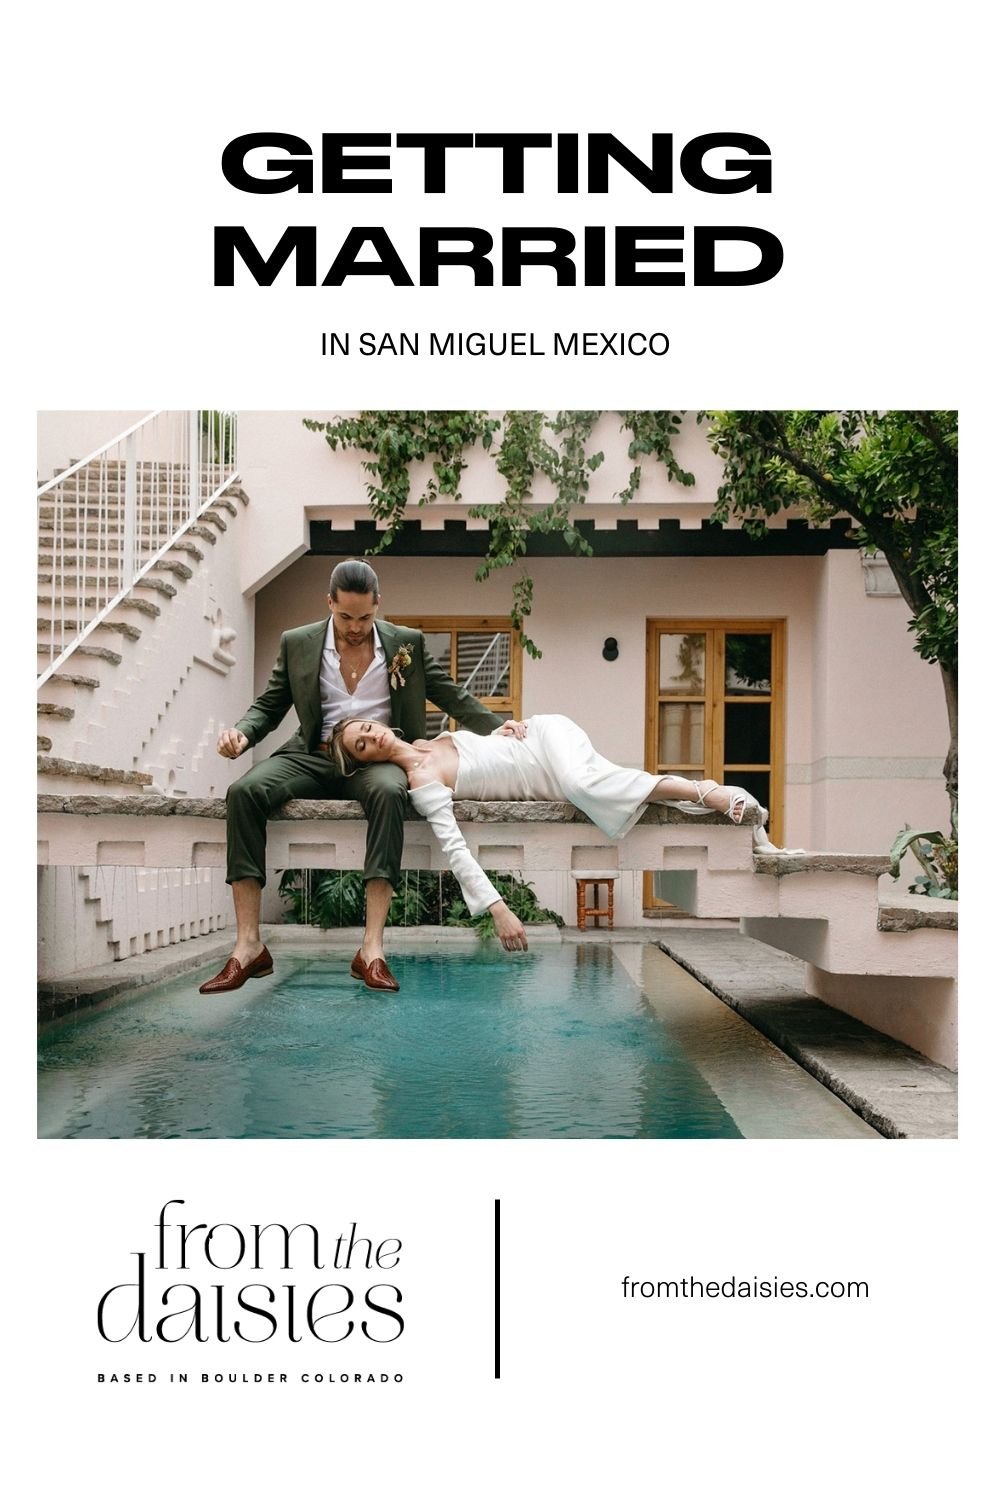 Bride and groom posing by the pool; image overlaid with text that reads Getting Married in San Miguel Mexico